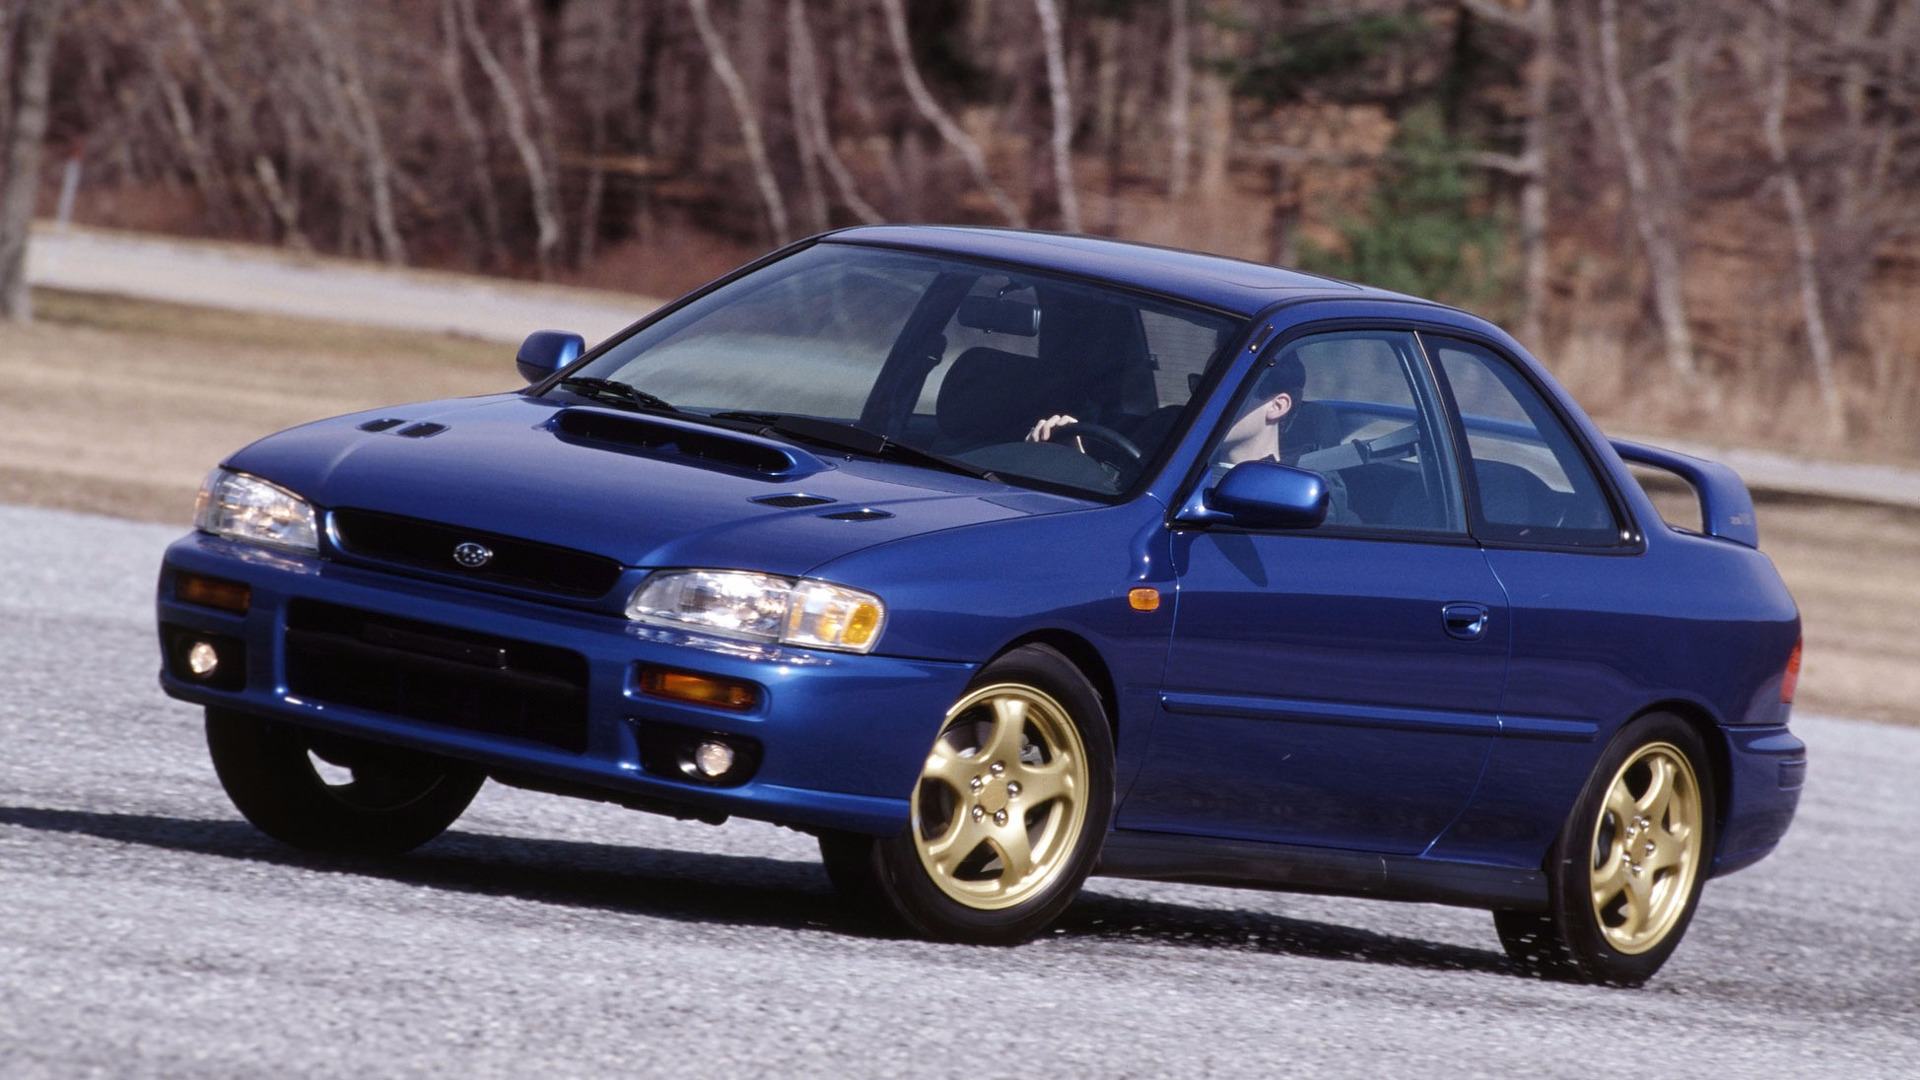 SUBARU OF AMERICA CONFIRMS PLAN TO RELEASE LIMITED EDITION